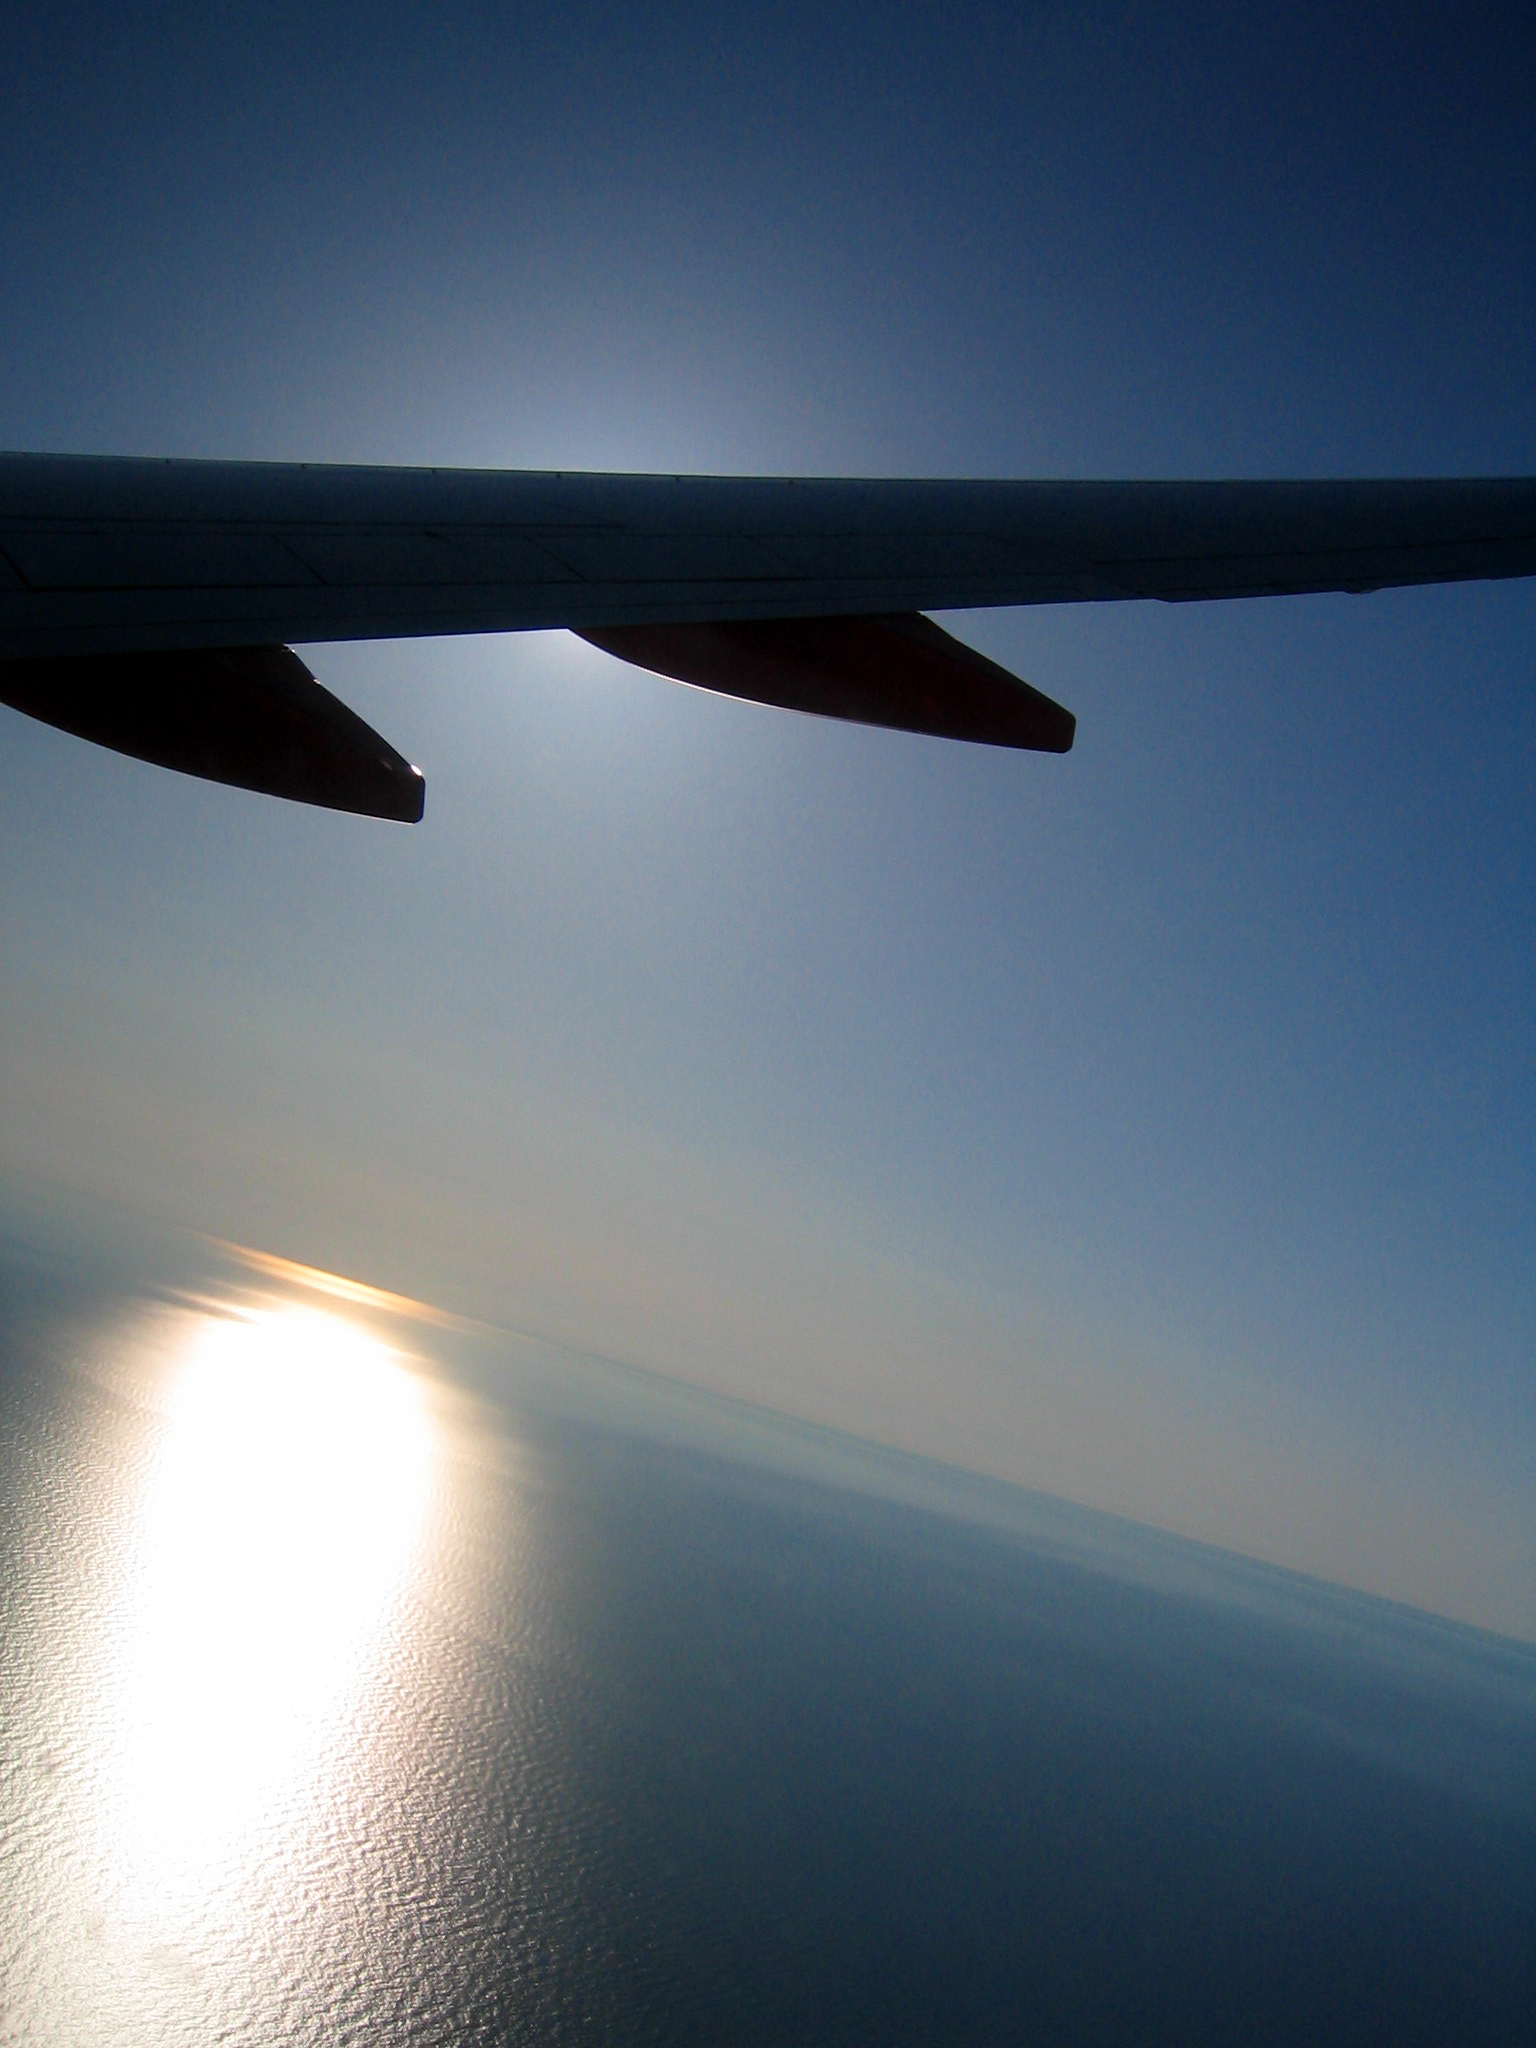 the back end of an airplane wing is shown with the sun shining through the plane wings